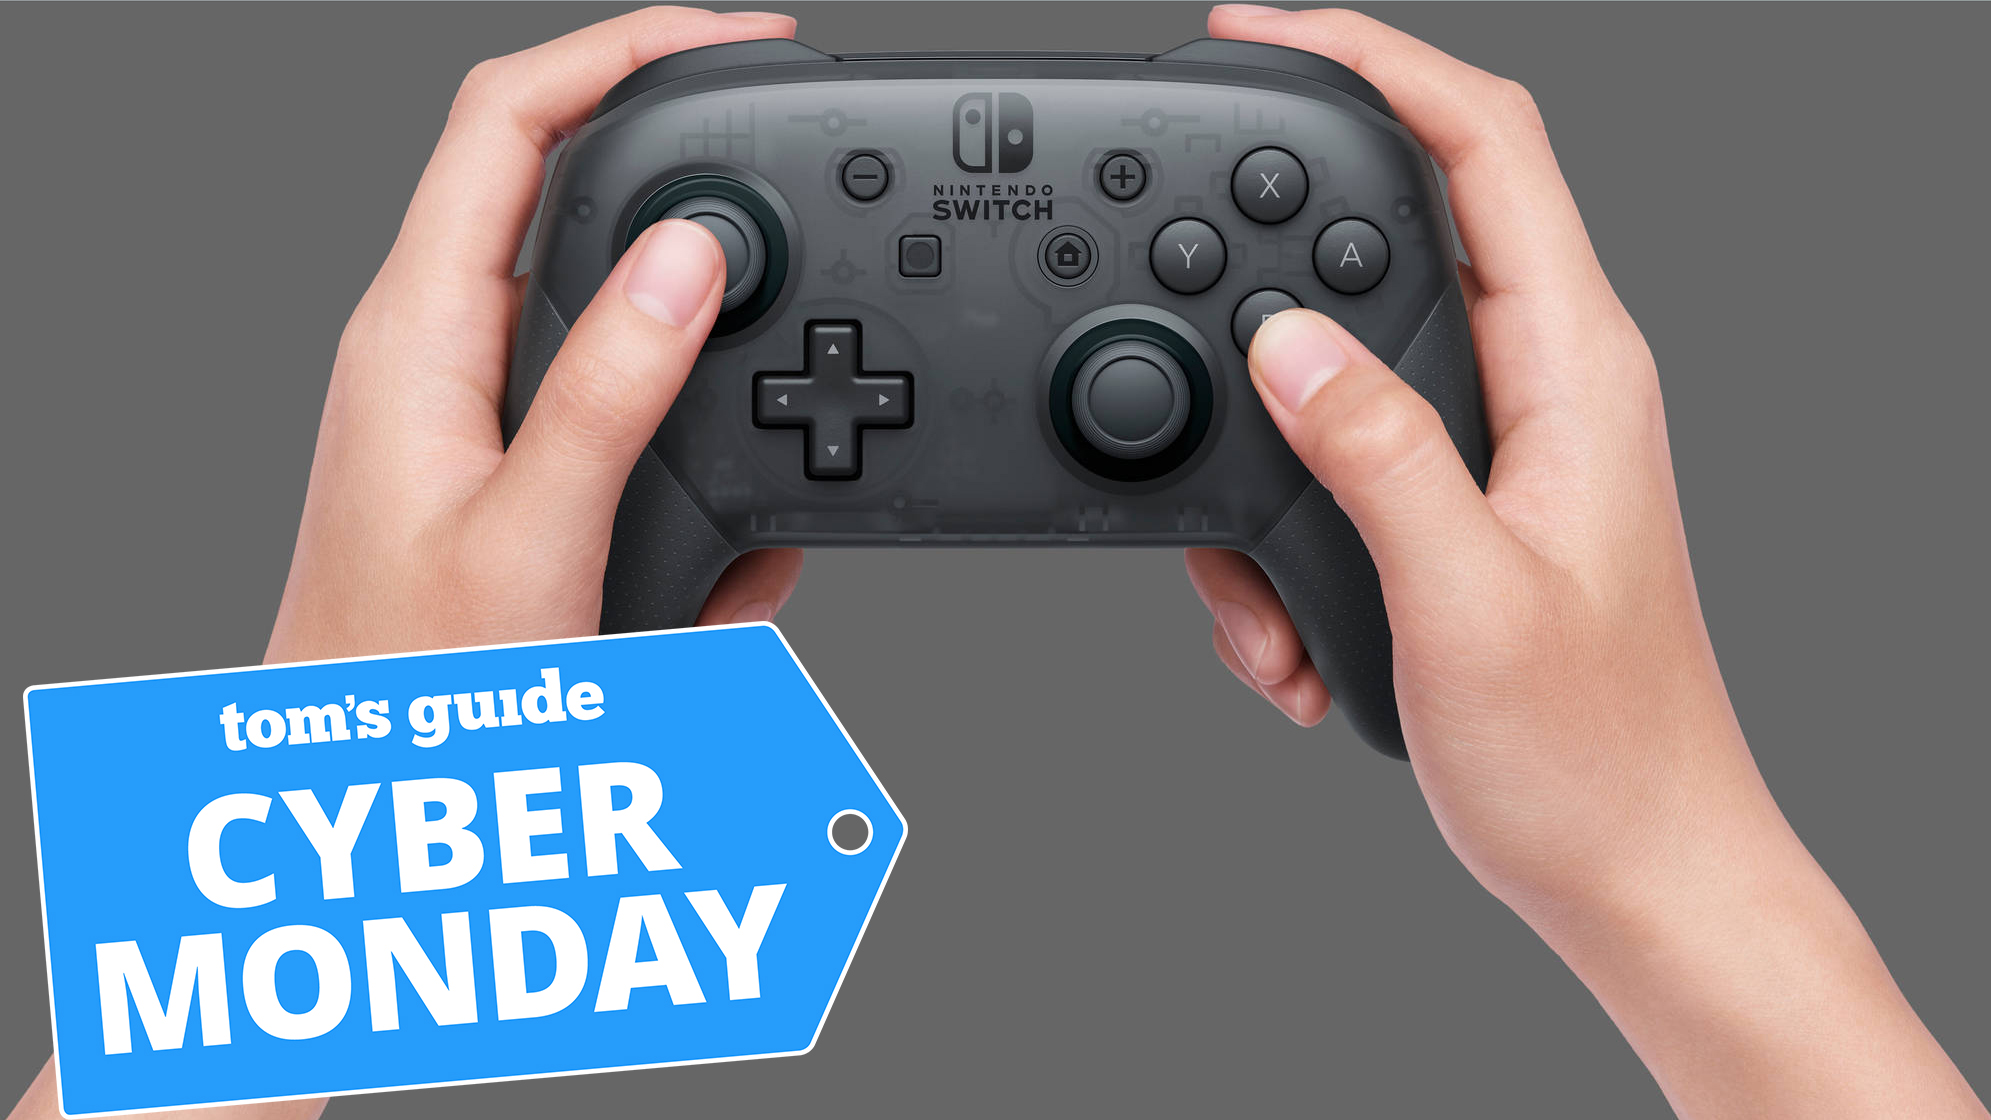 Nintendo switch pro controller with cyber monday business label